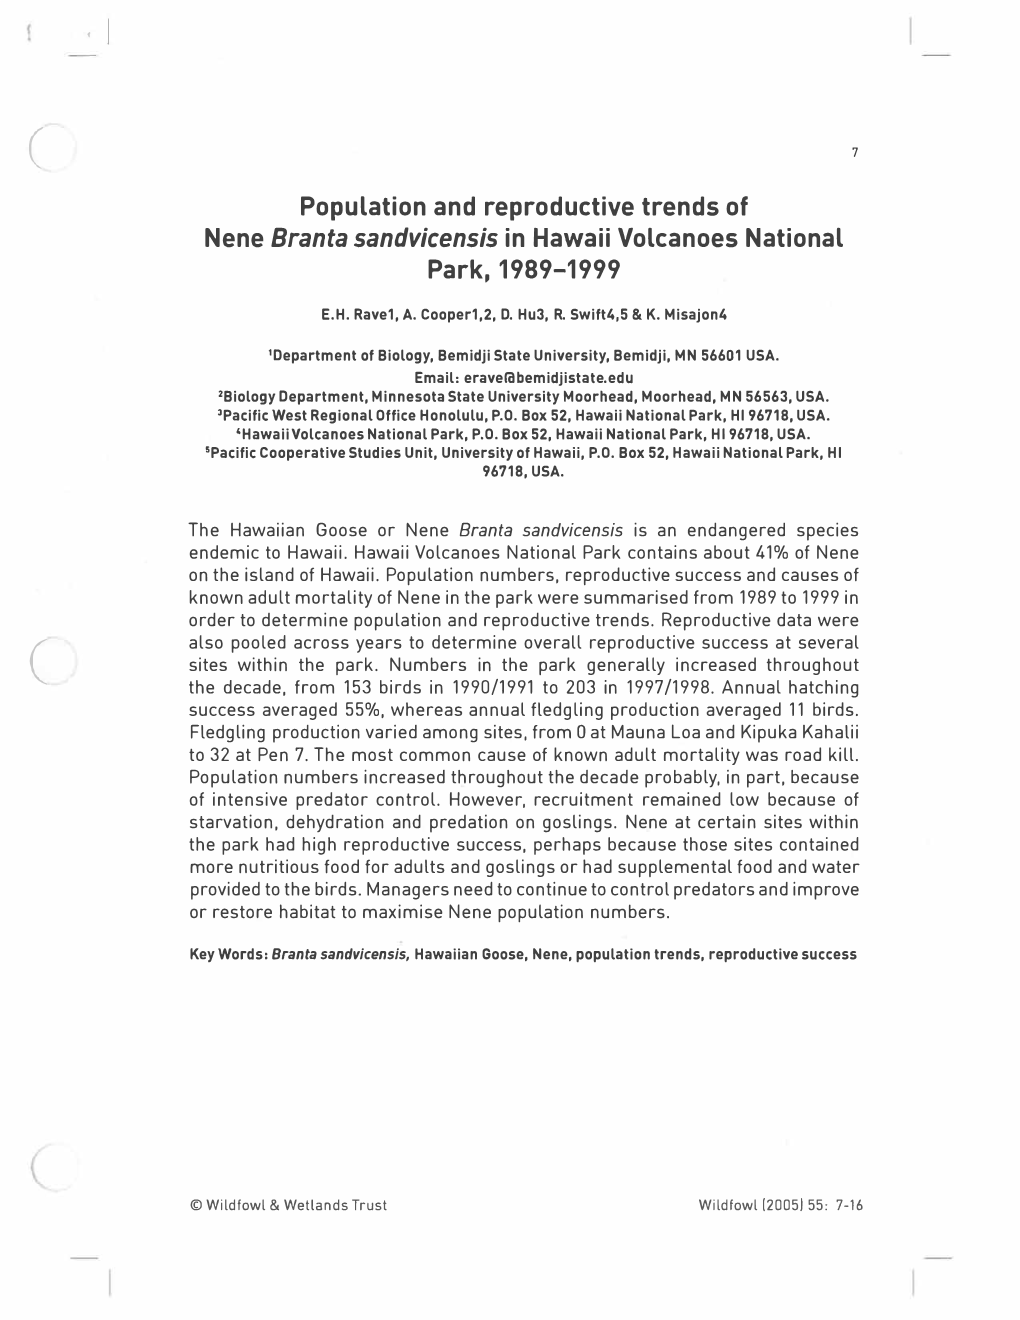 Population and Reproductive Trends of Nene Branta Sandvicensis in Hawaii Volcanoes National Park,1989-1999